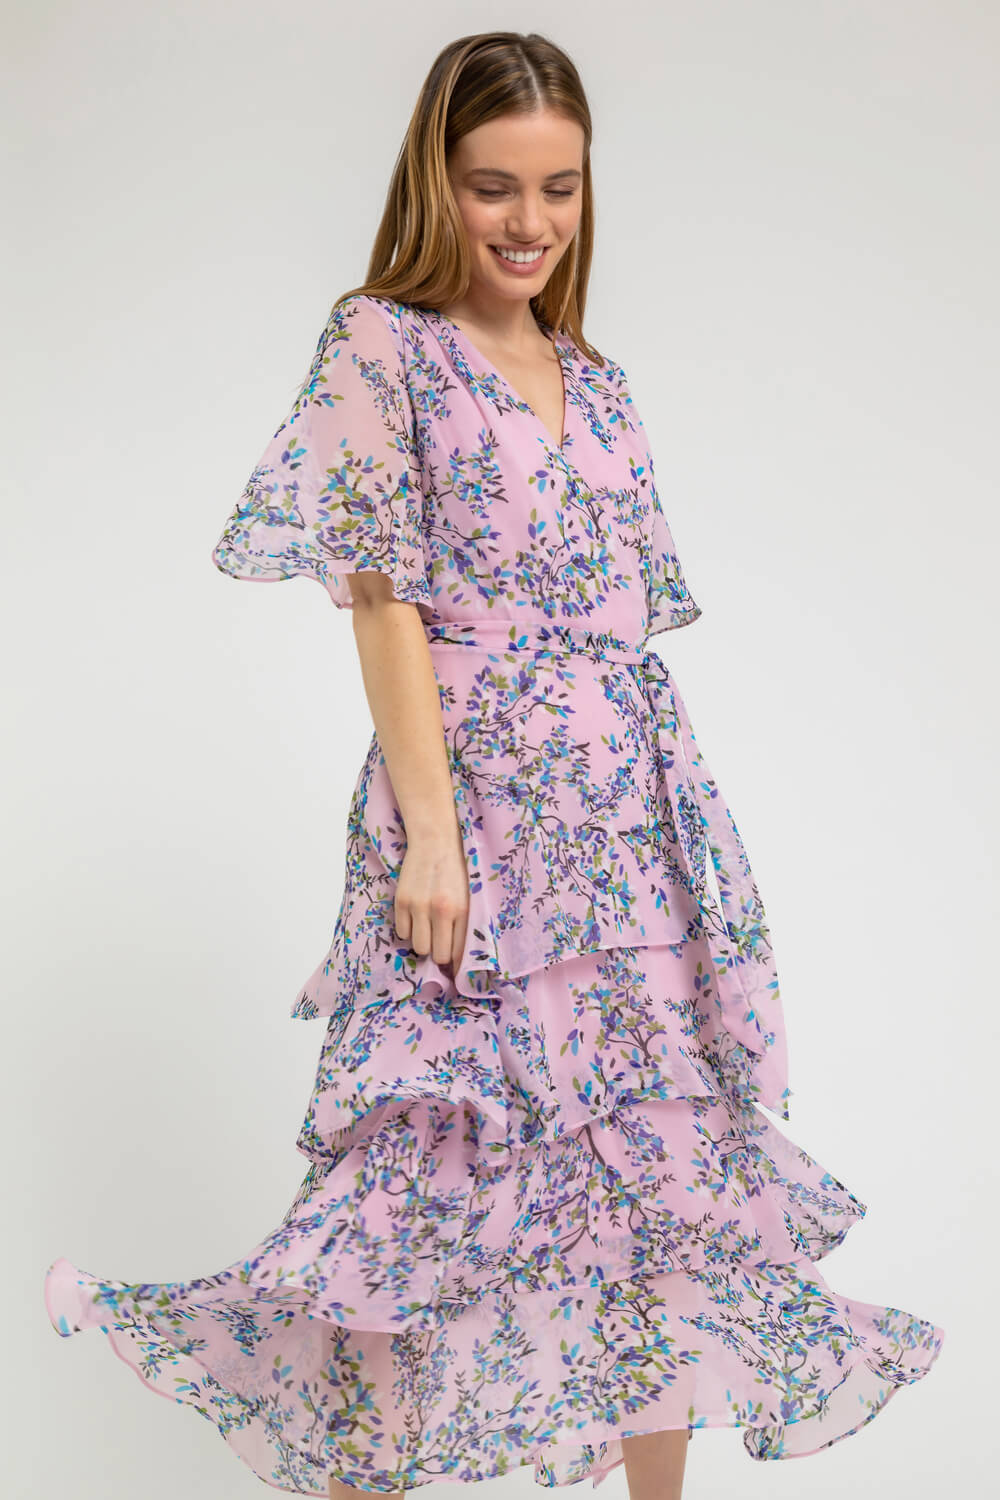 Lilac Petite Floral Print Tiered Dress, Image 1 of 5